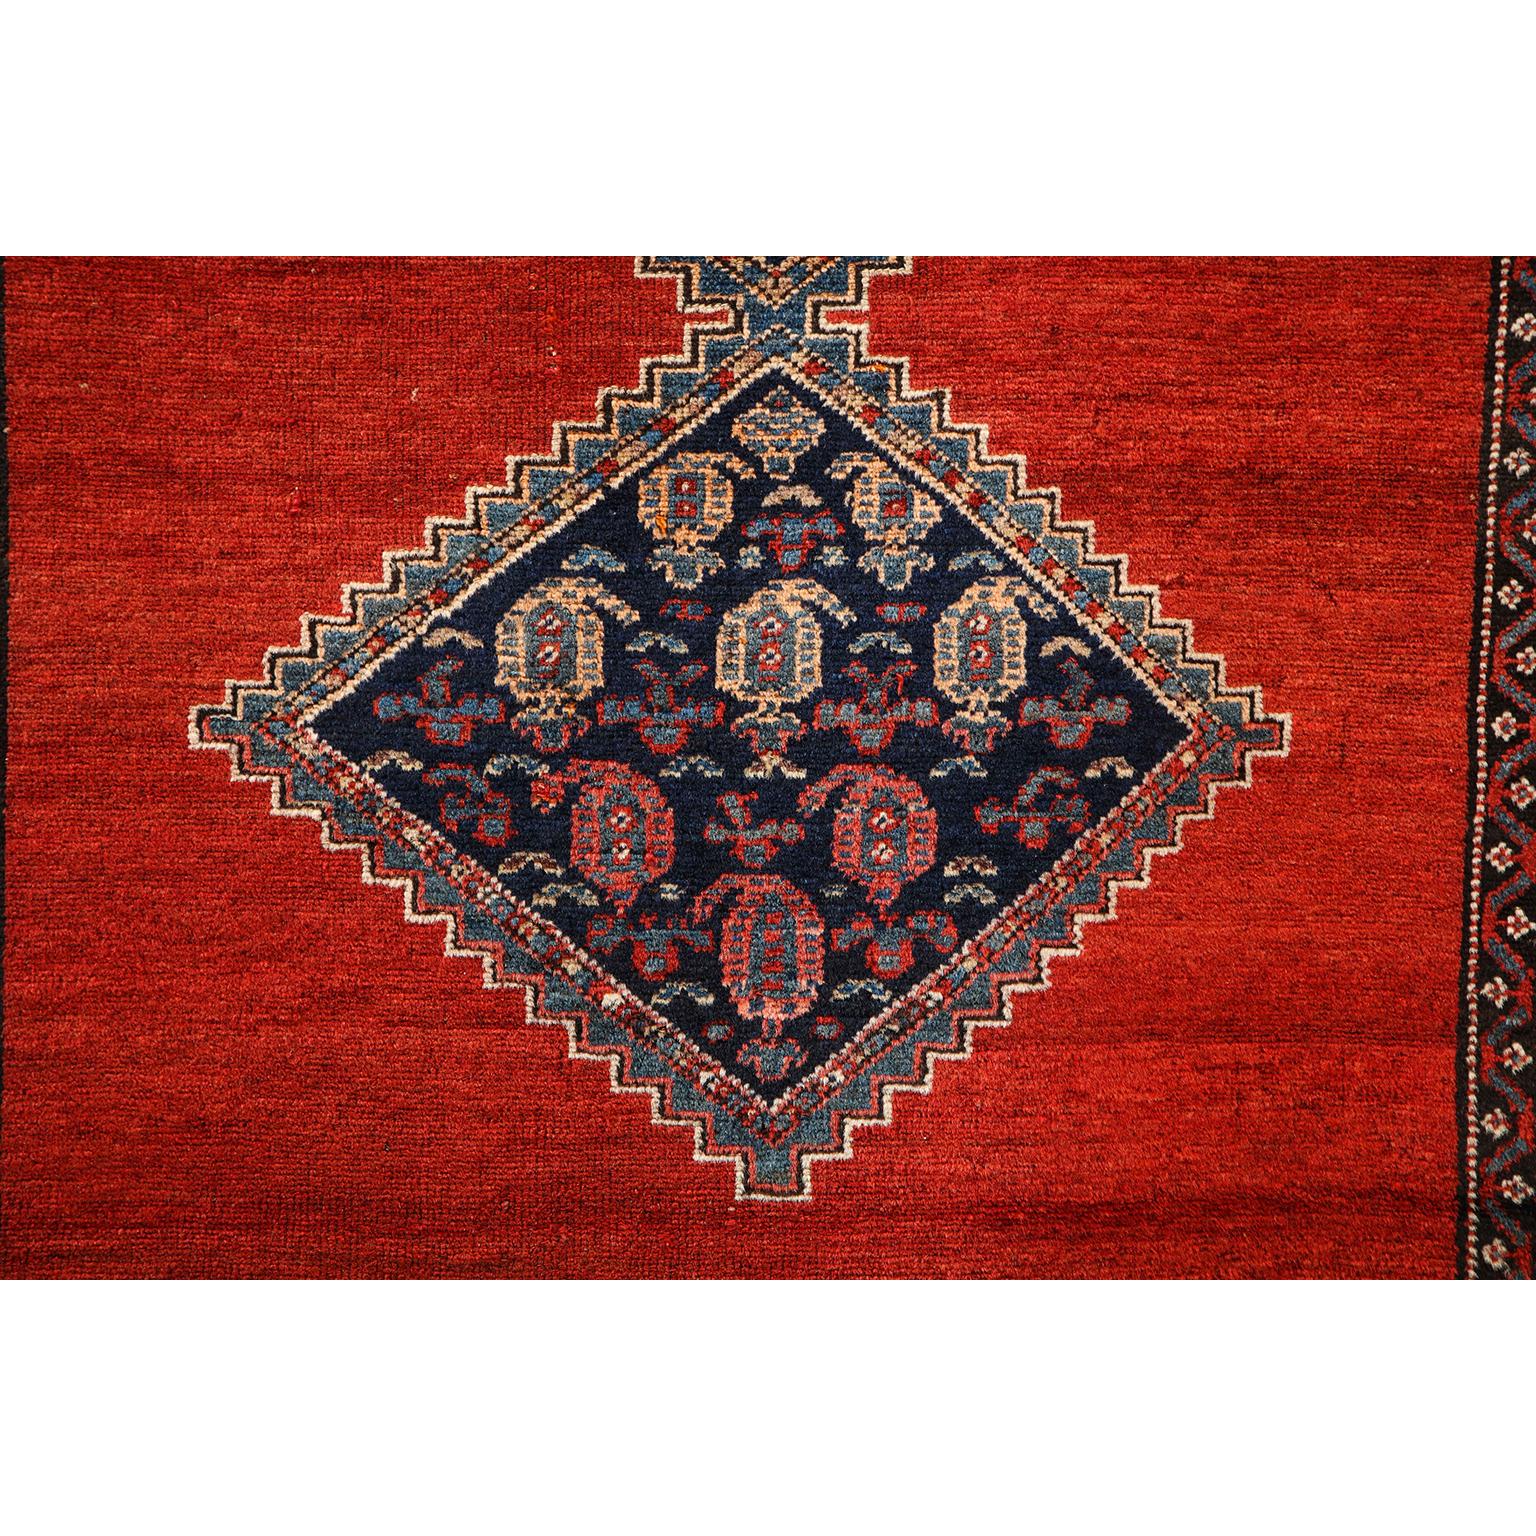 Antique 1900s Persian Malayer Rug, 4' x 6' In Good Condition For Sale In New York, NY